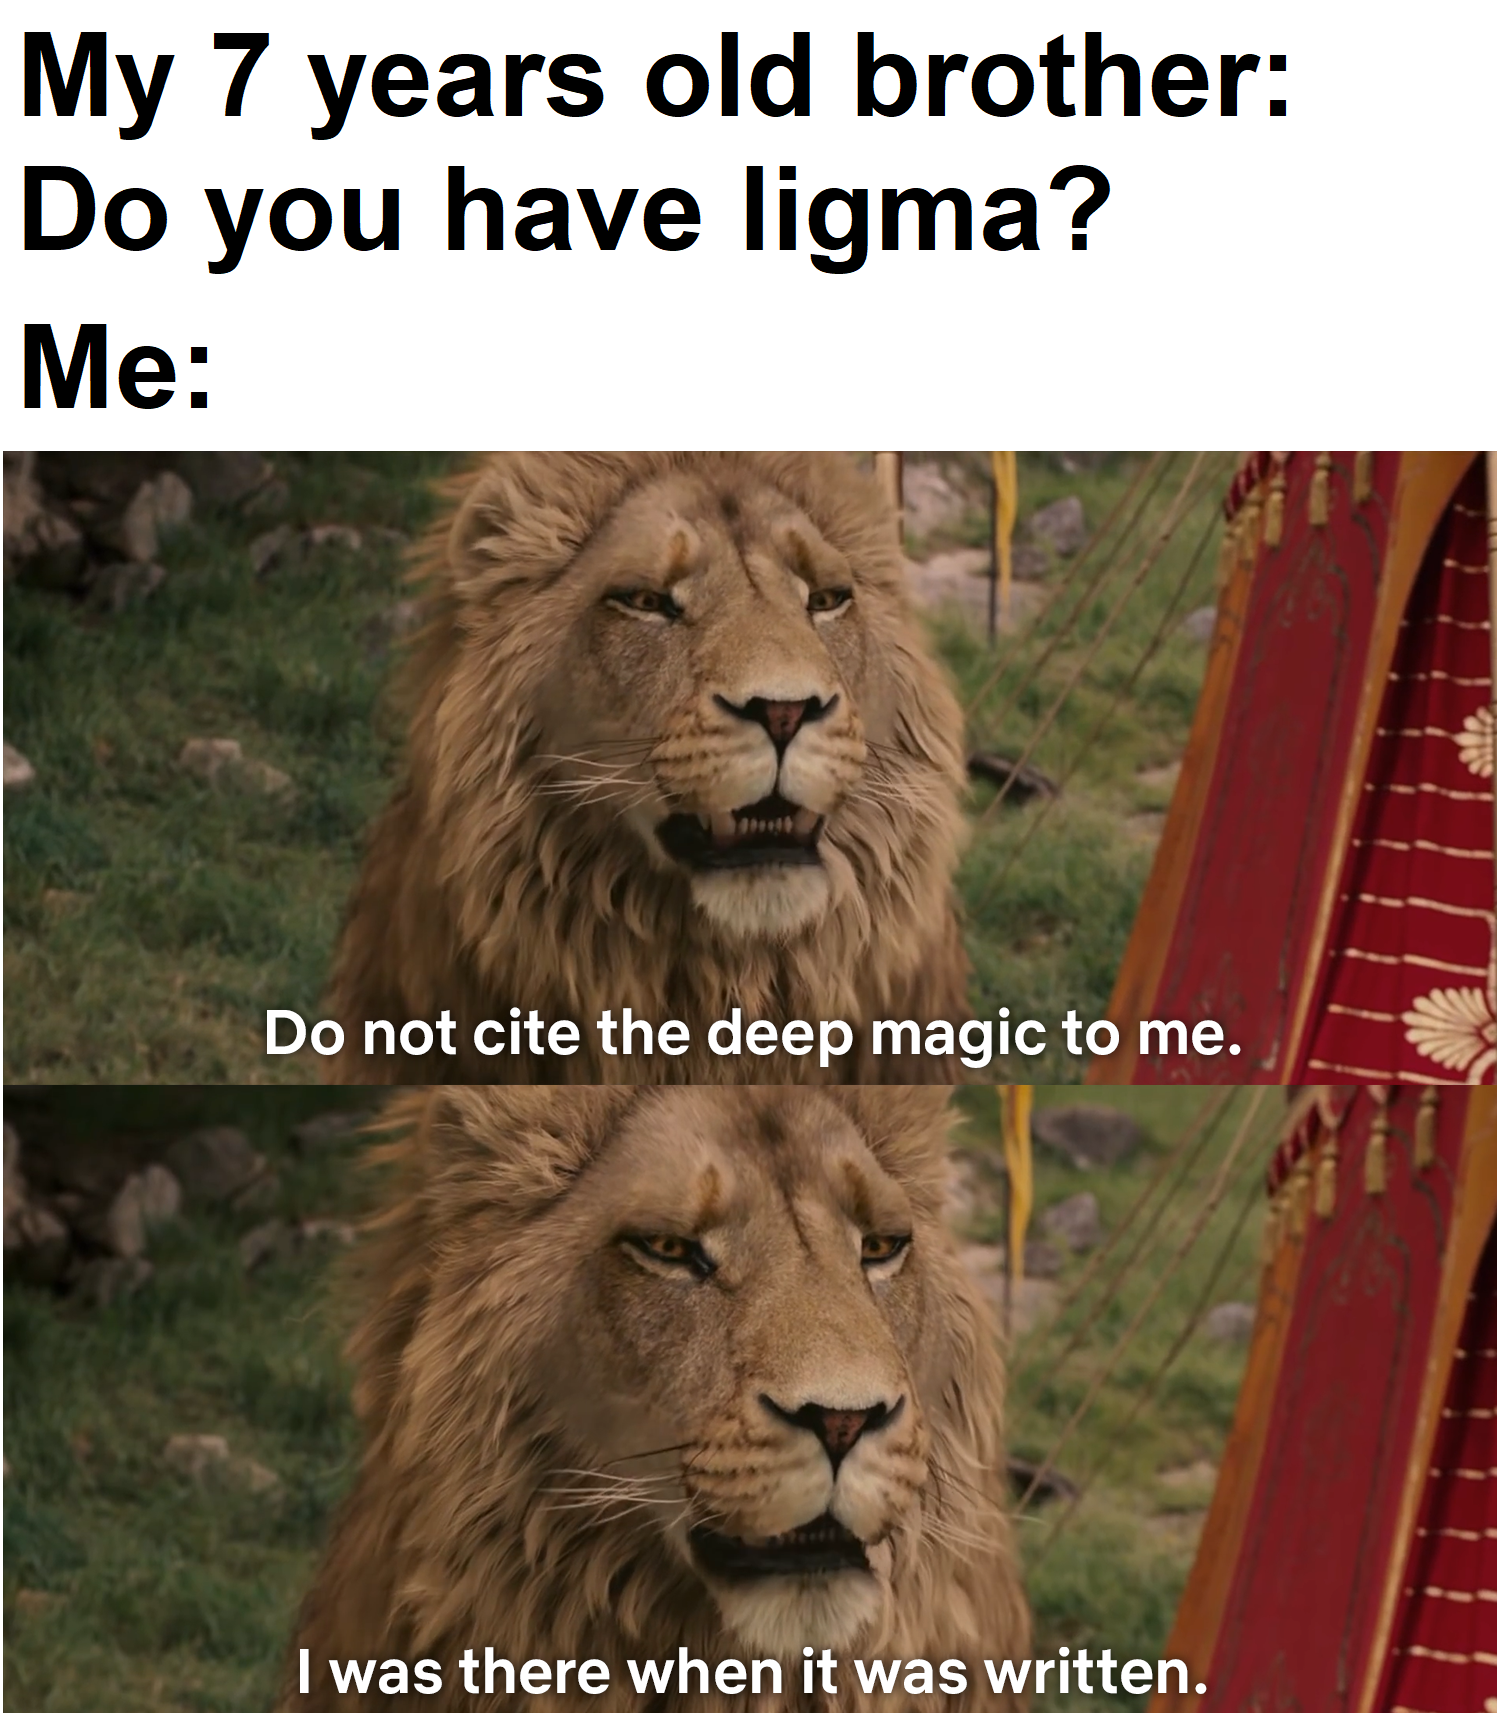 do not cite the deep magic meme - My 7 years old brother Do you have ligma? Me Do not cite the deep magic to me. I was there when it was written.